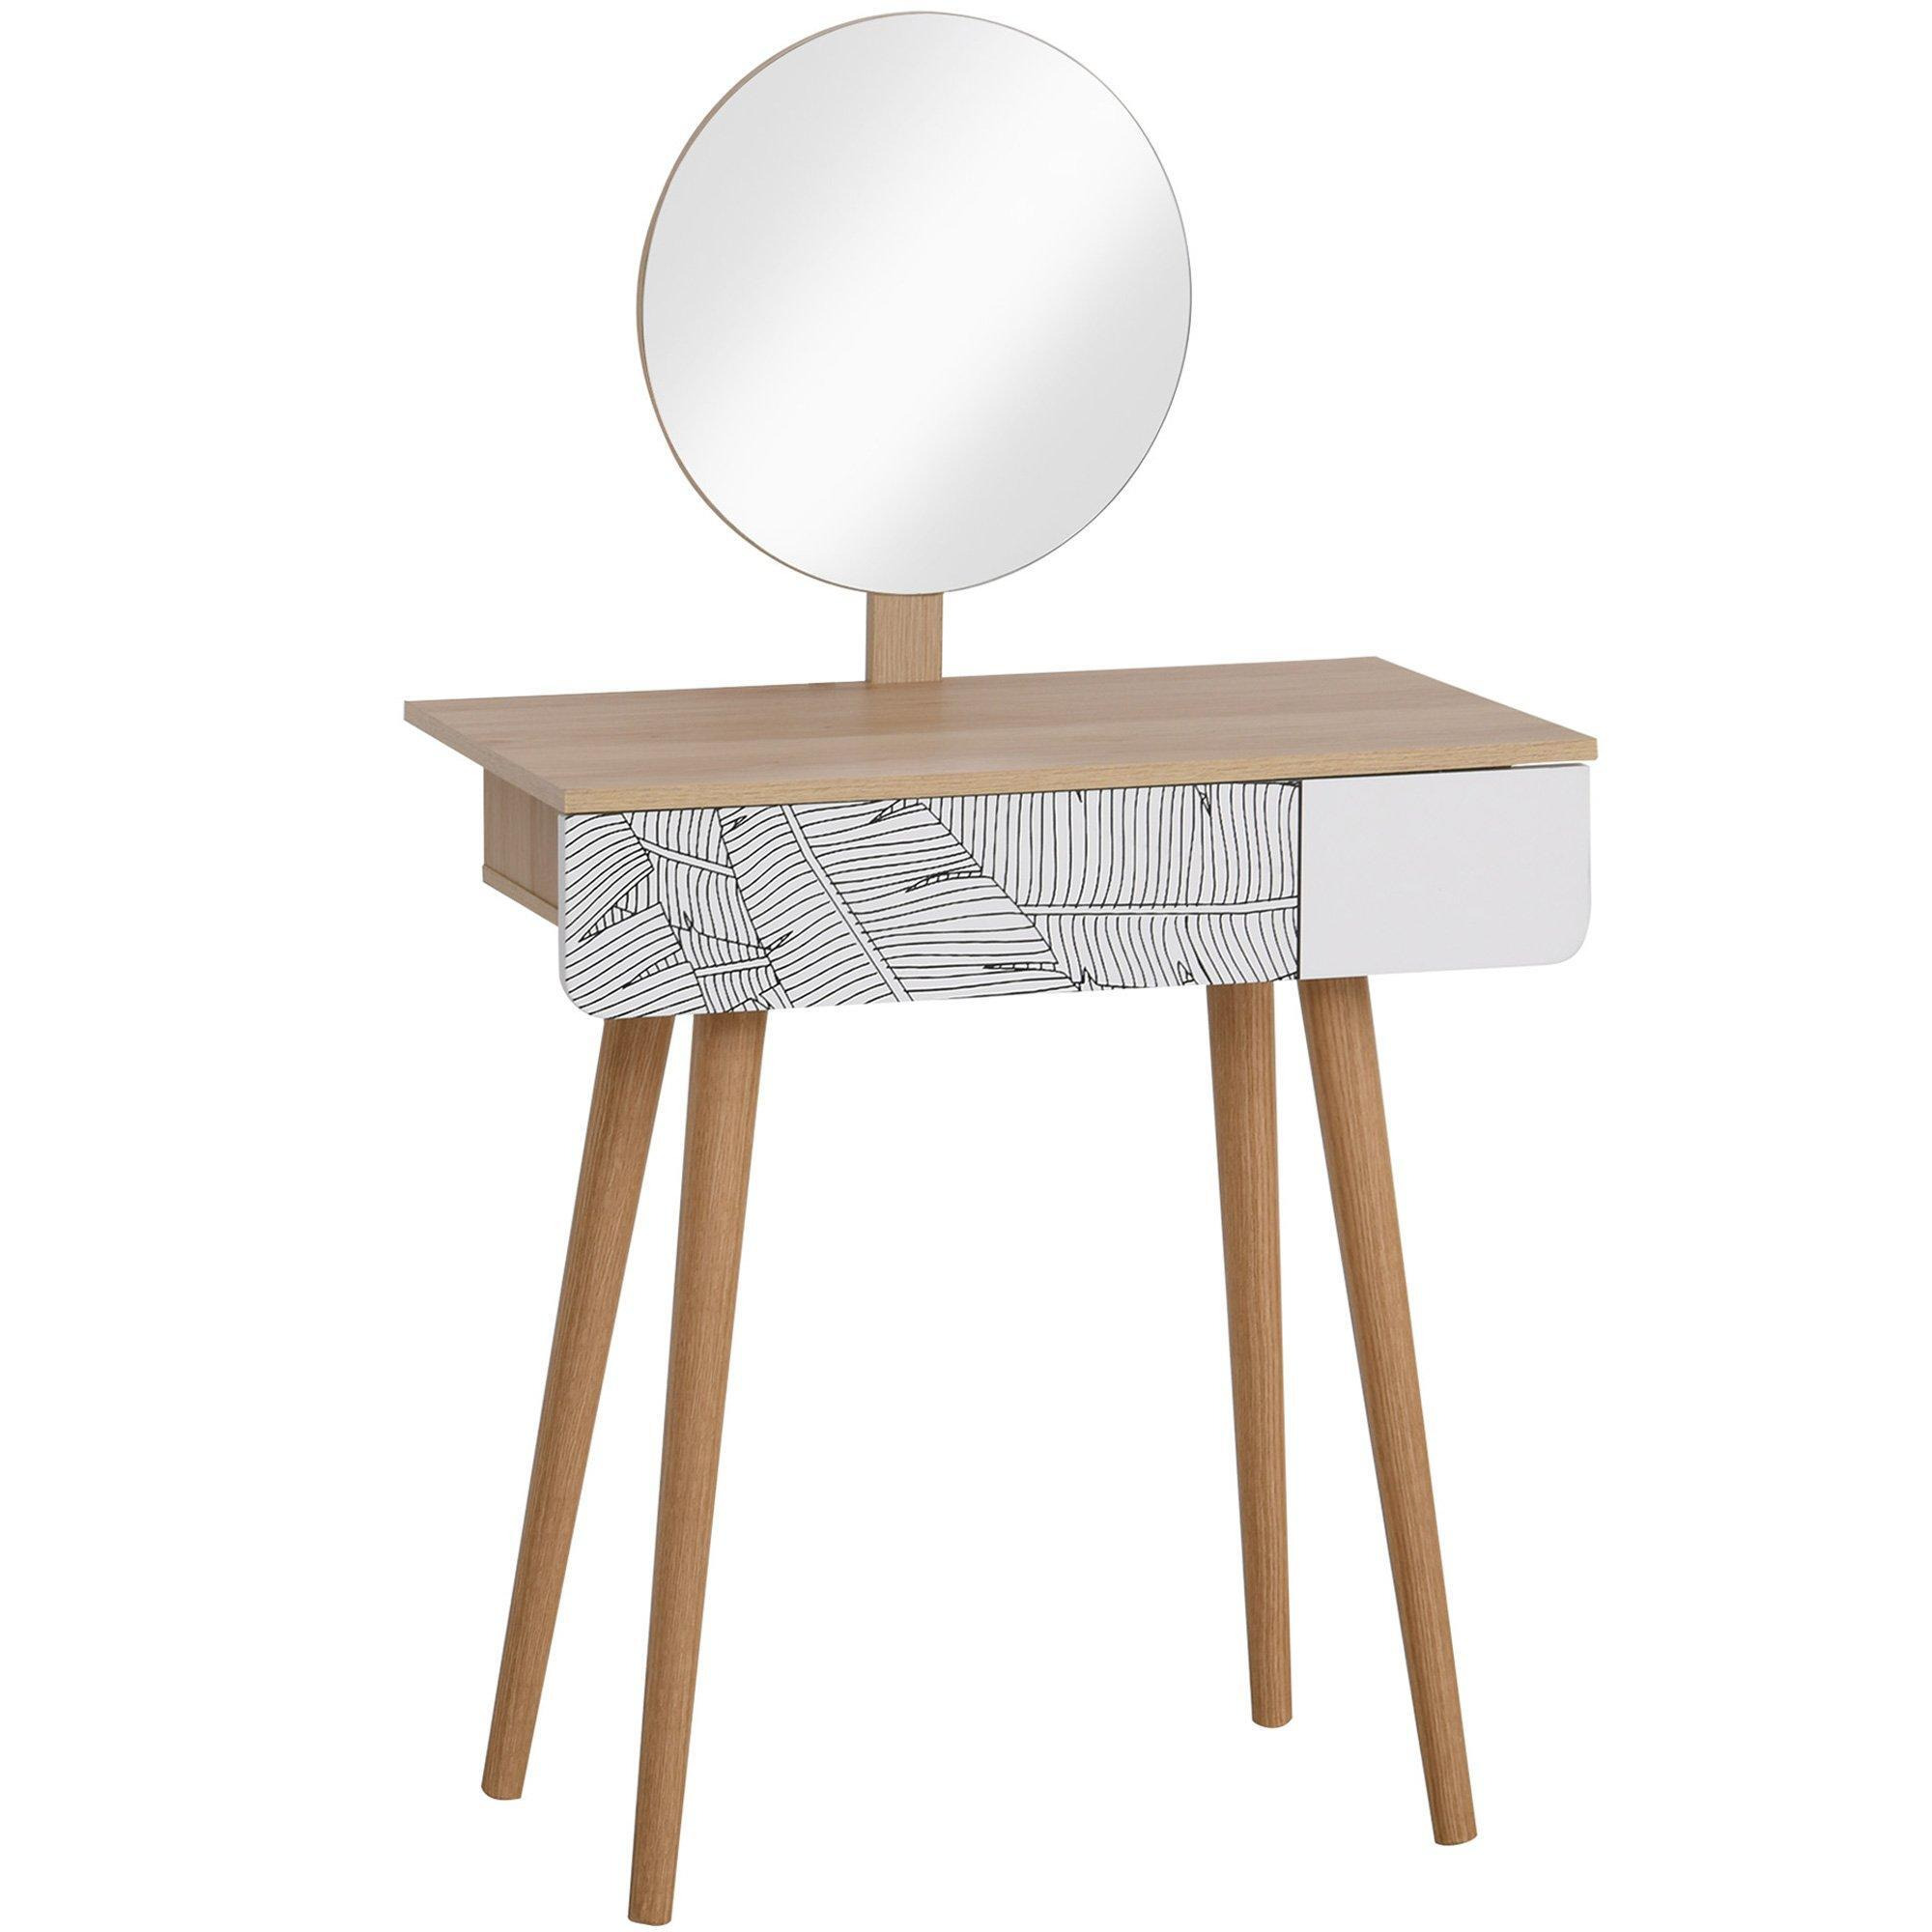 Wooden Compact Dressing Table Drawer Mirror 4 Legs Table Top Bedroom - image 1